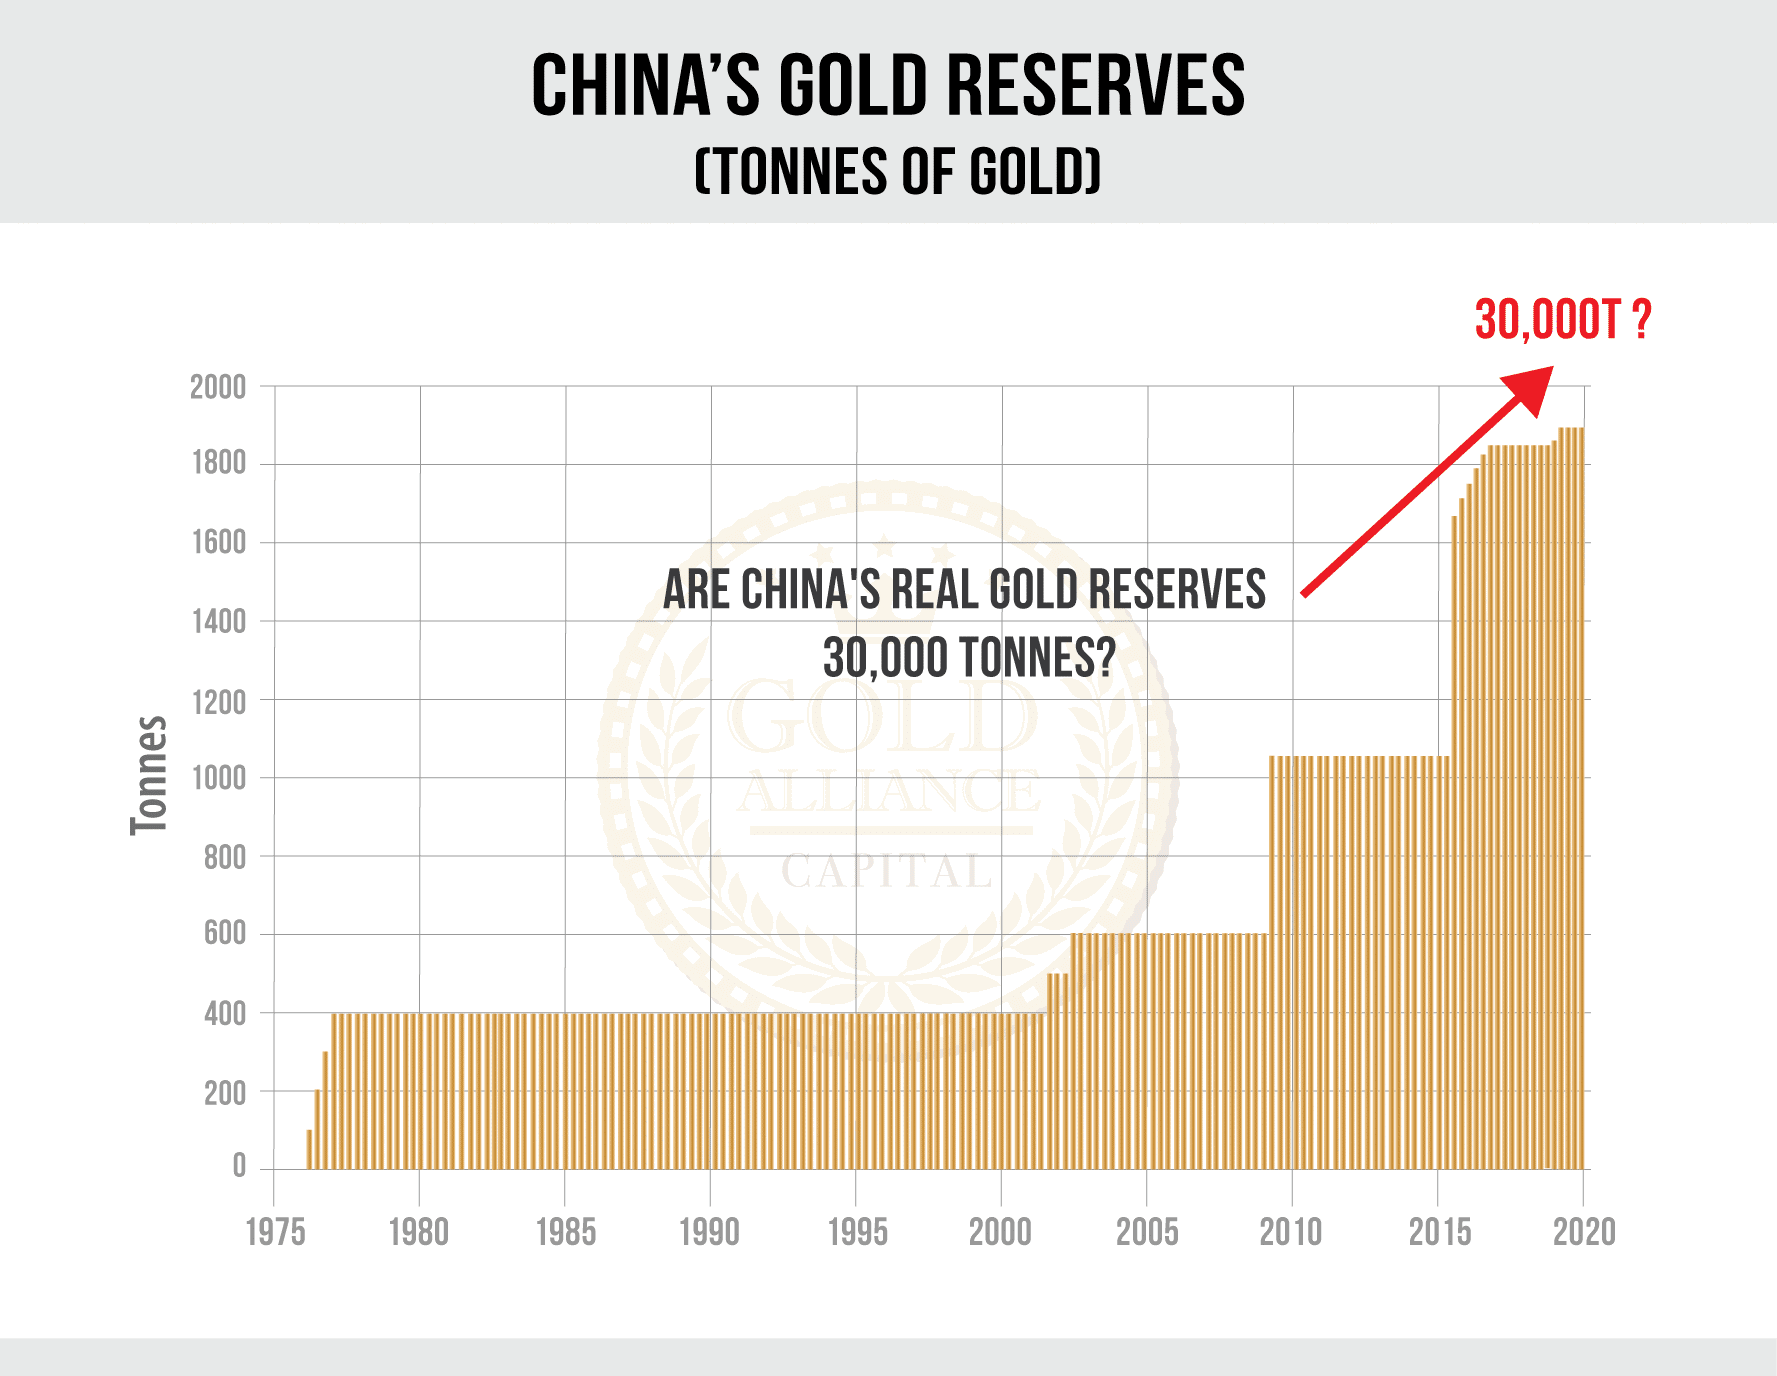 China has been building their gold reserves for the last 20 years. In the last six years, the growth of China’s gold reserves has been particularly aggressive.